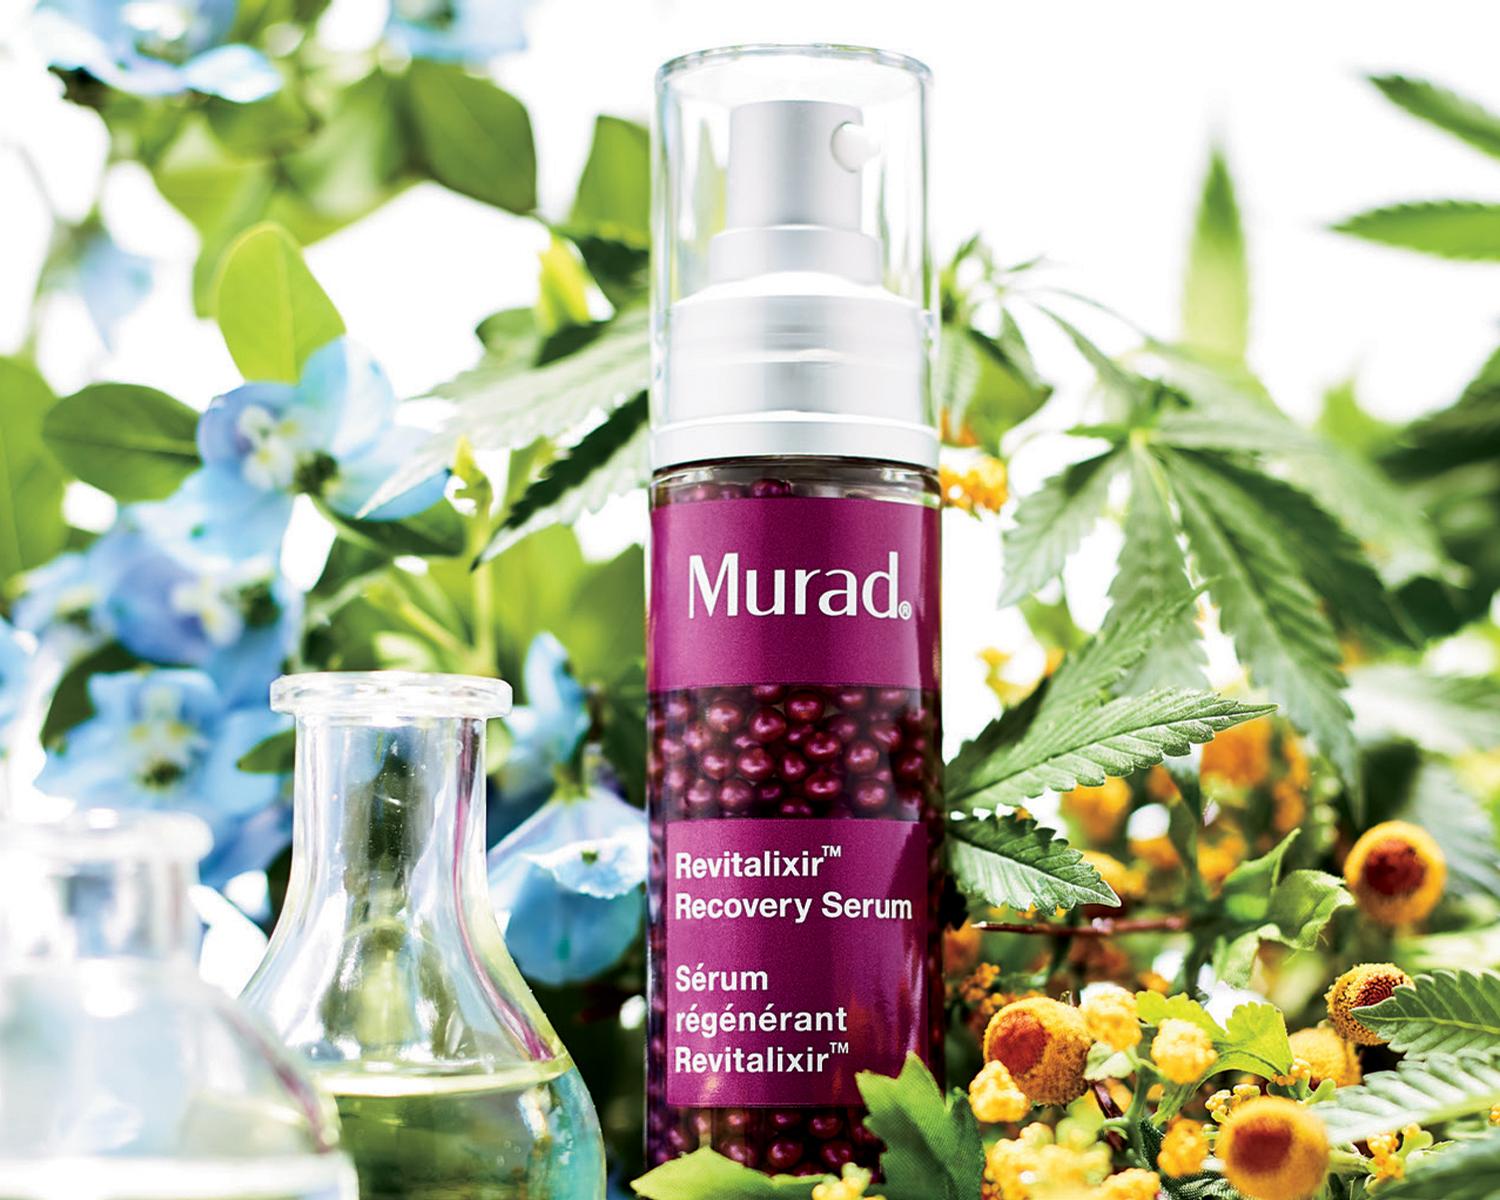 The serum contains cannabis oil, wild indigo and niacinamide to revive and renew the skin / 